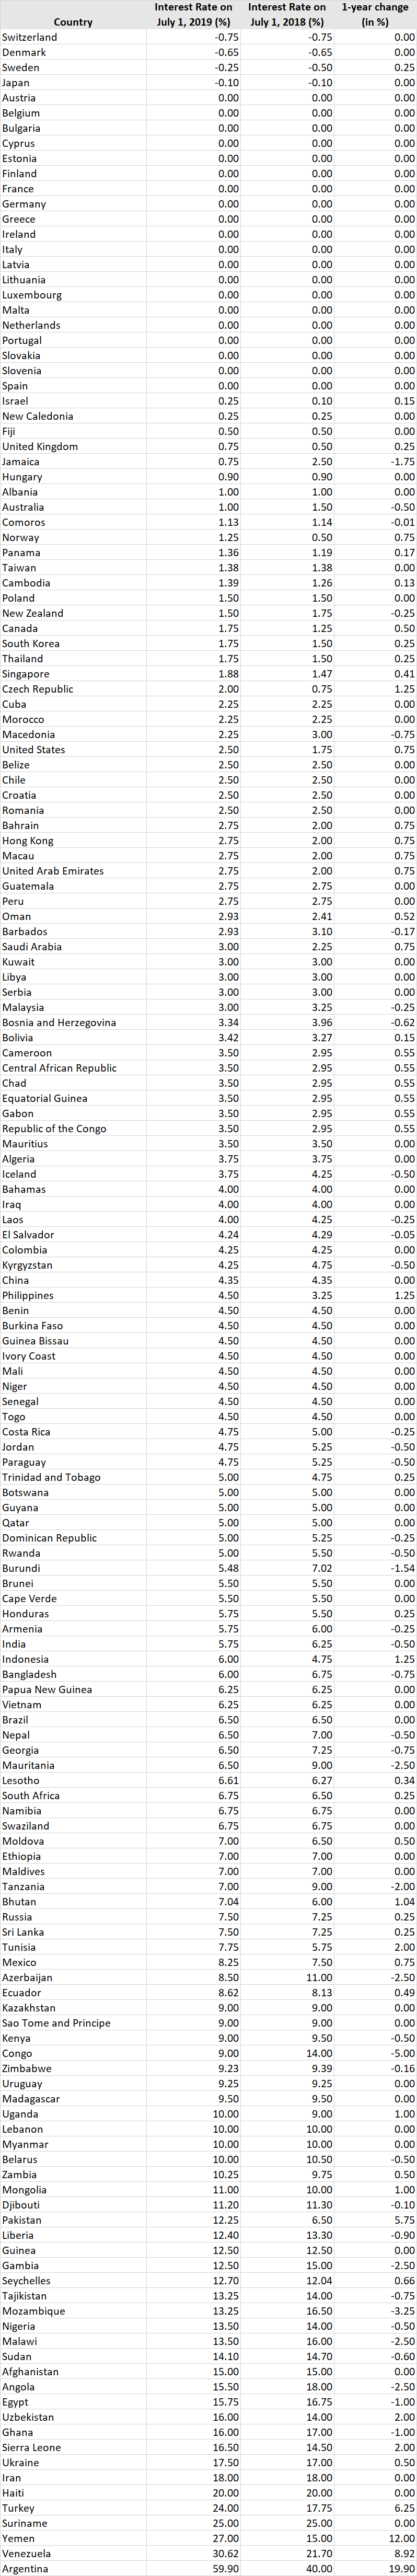 Interest rates for each country July 2019